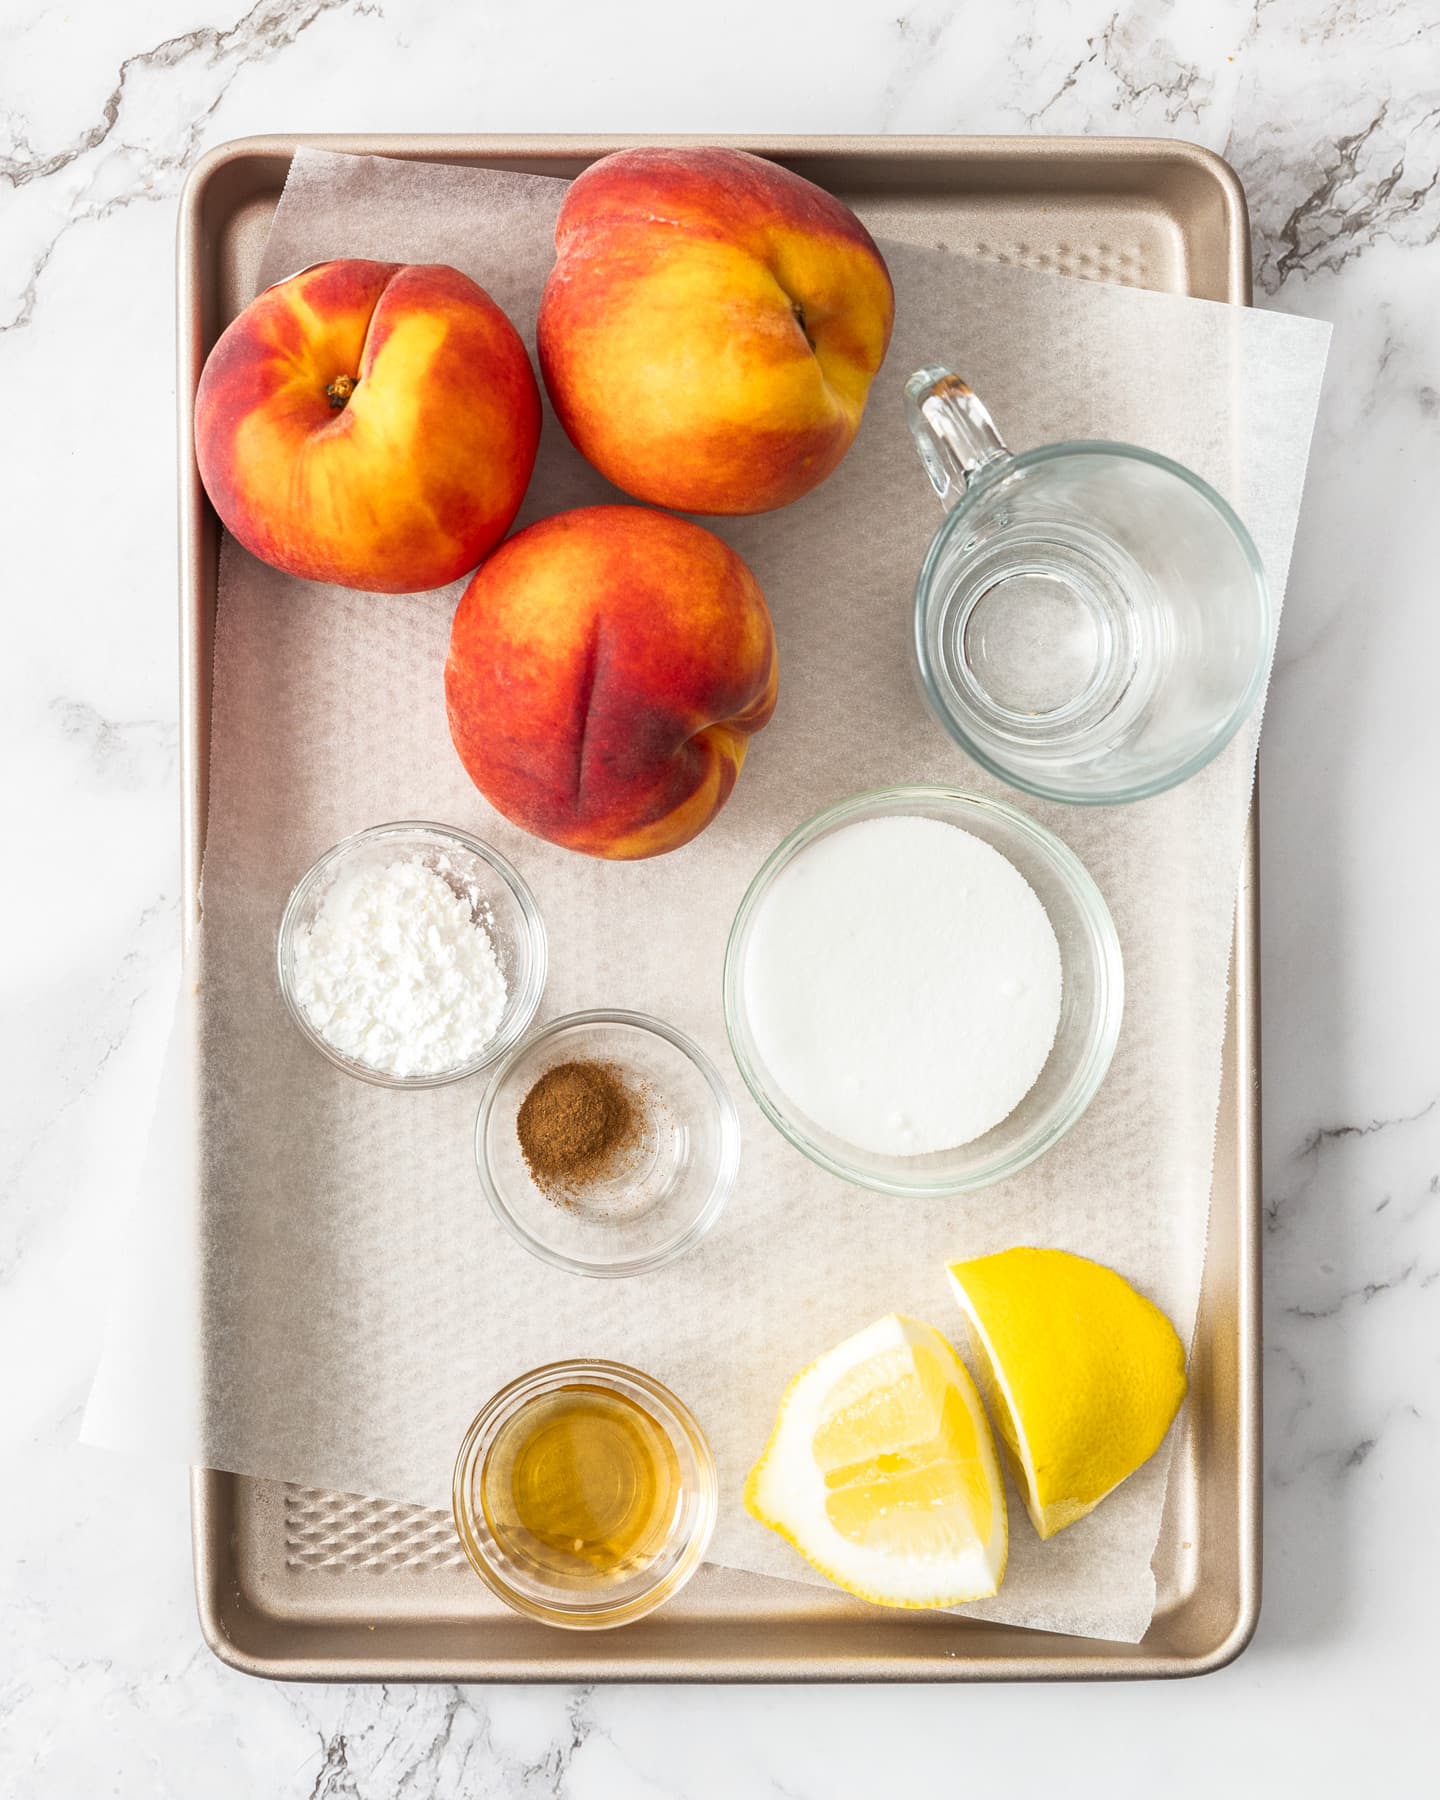 Ingredients for peach compote on a baking tray.